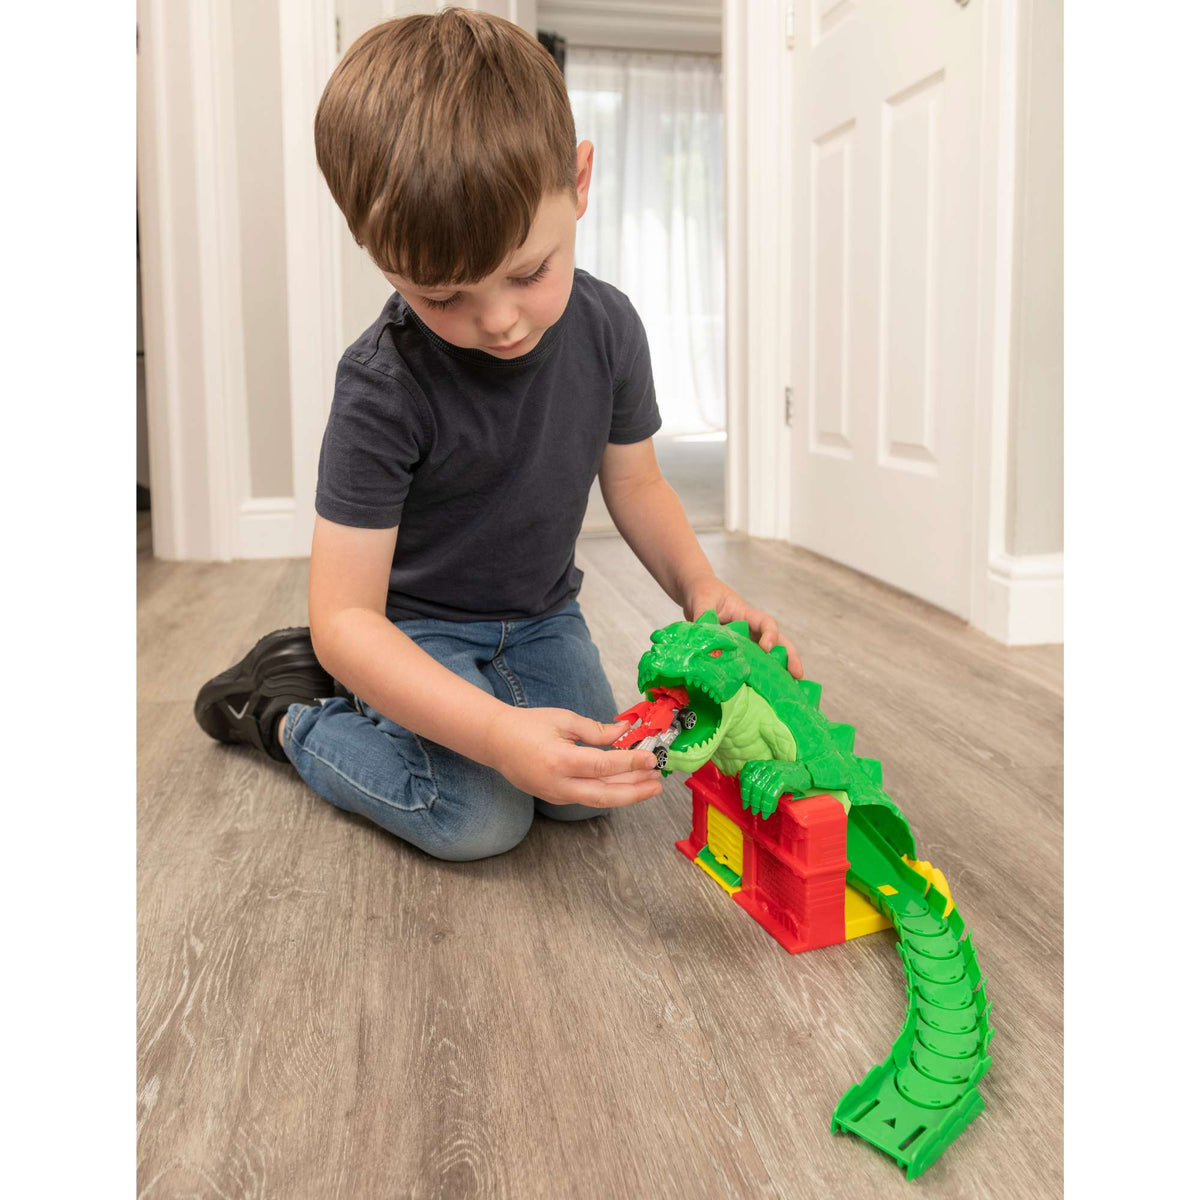 Teamsterz Reptile Rampage Car Launcher | Includes Beast Machine Car